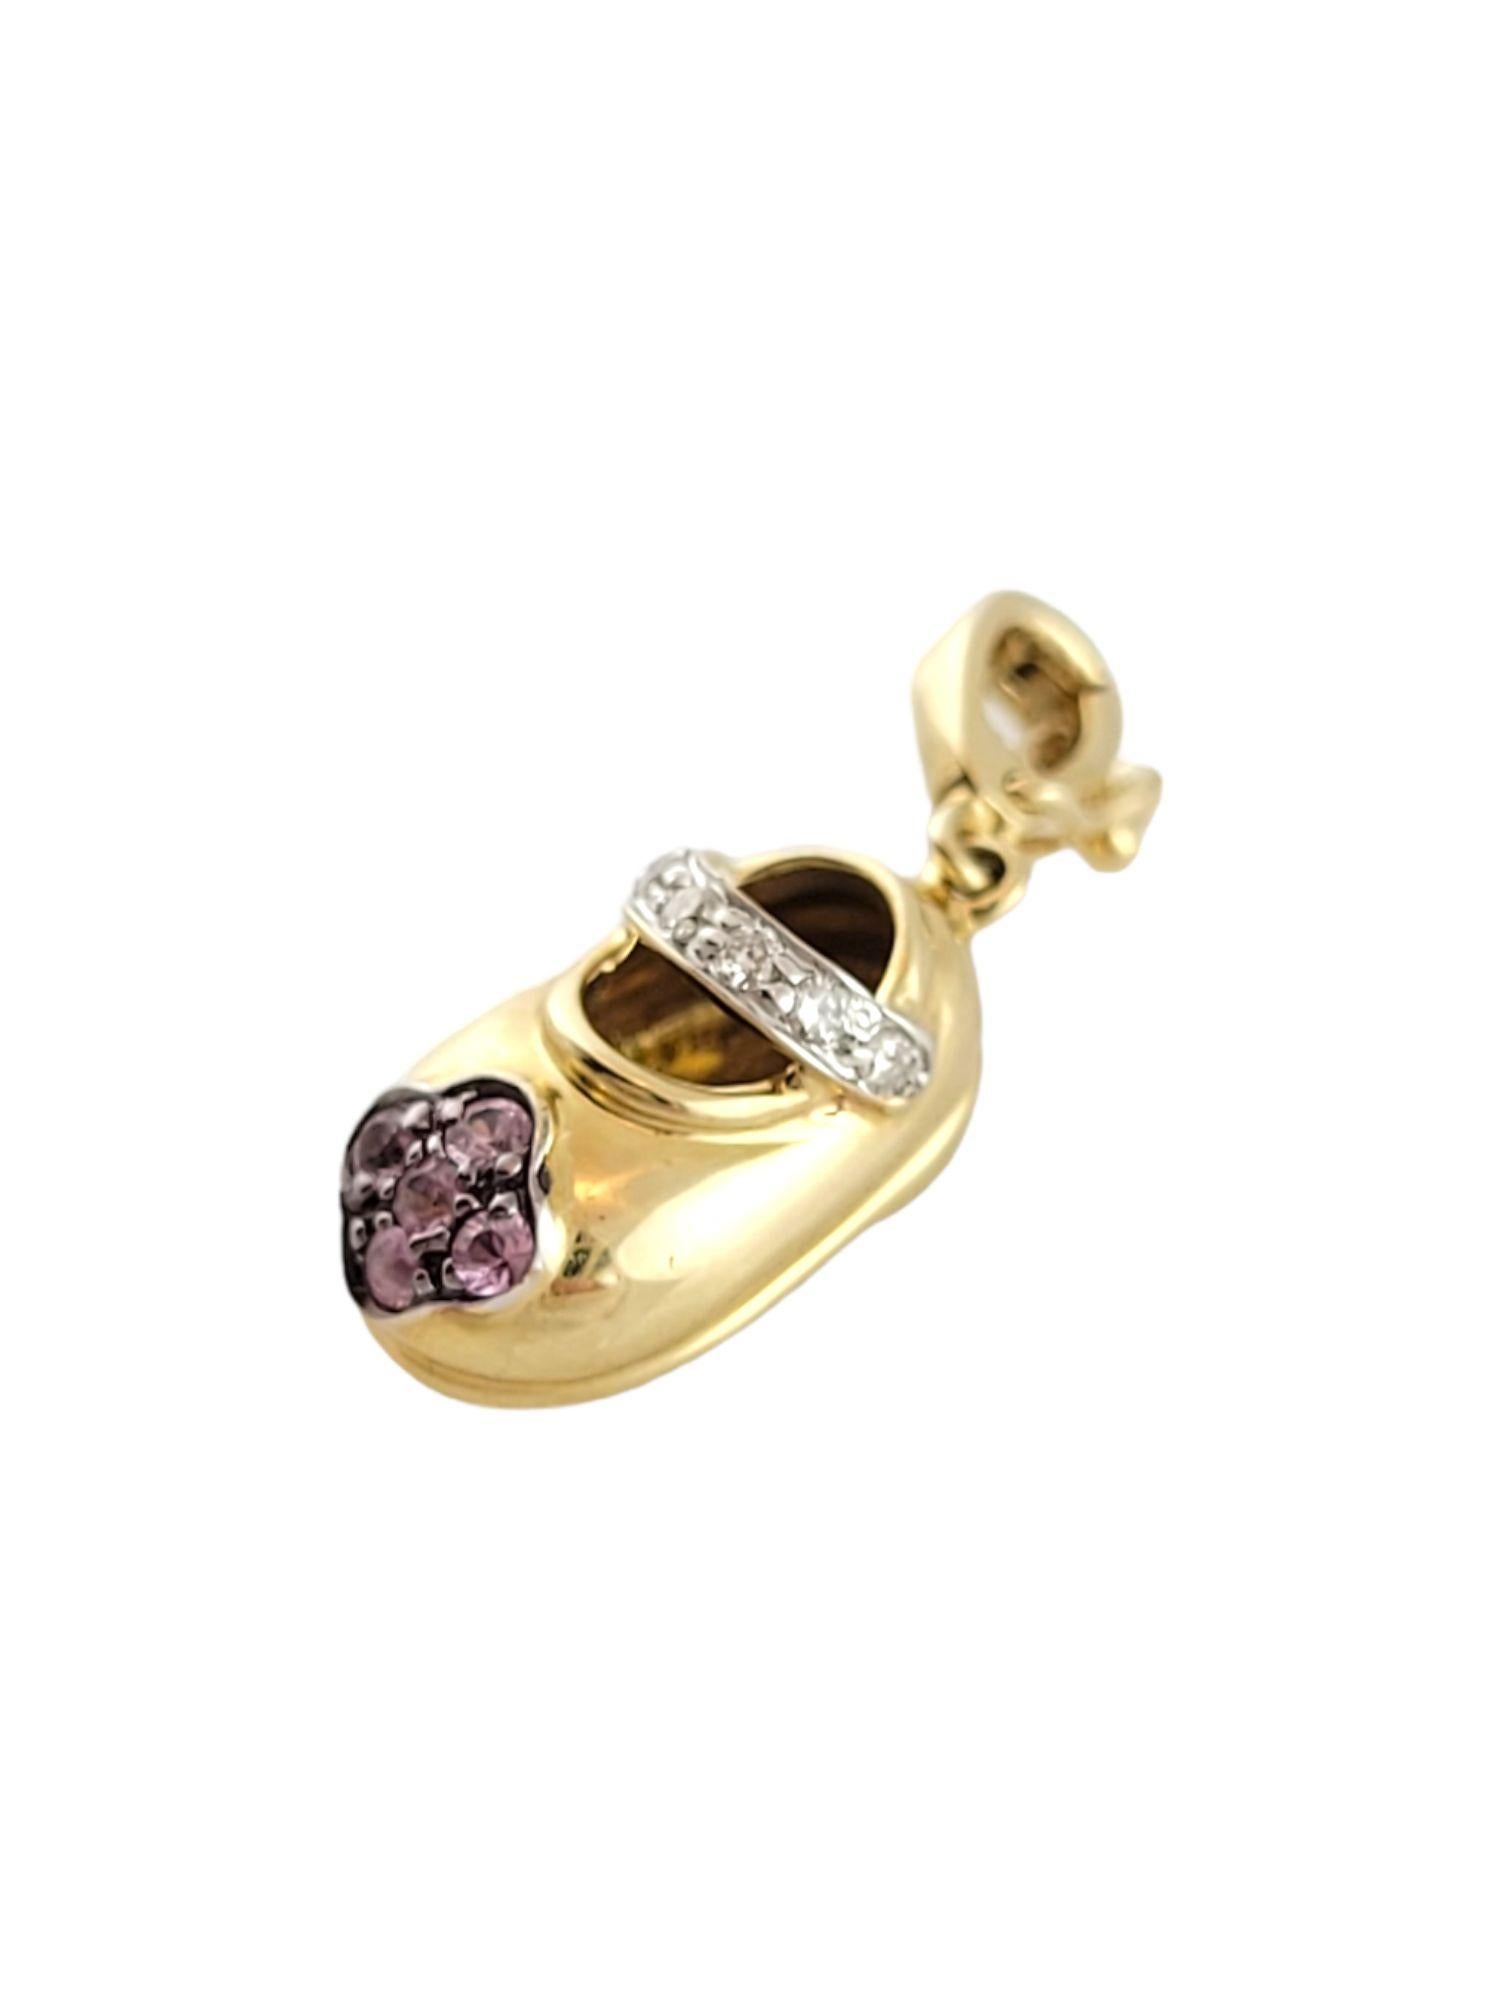 14k Yellow Gold Shoe Charm with Diamonds & Purple Stones In Good Condition For Sale In Washington Depot, CT